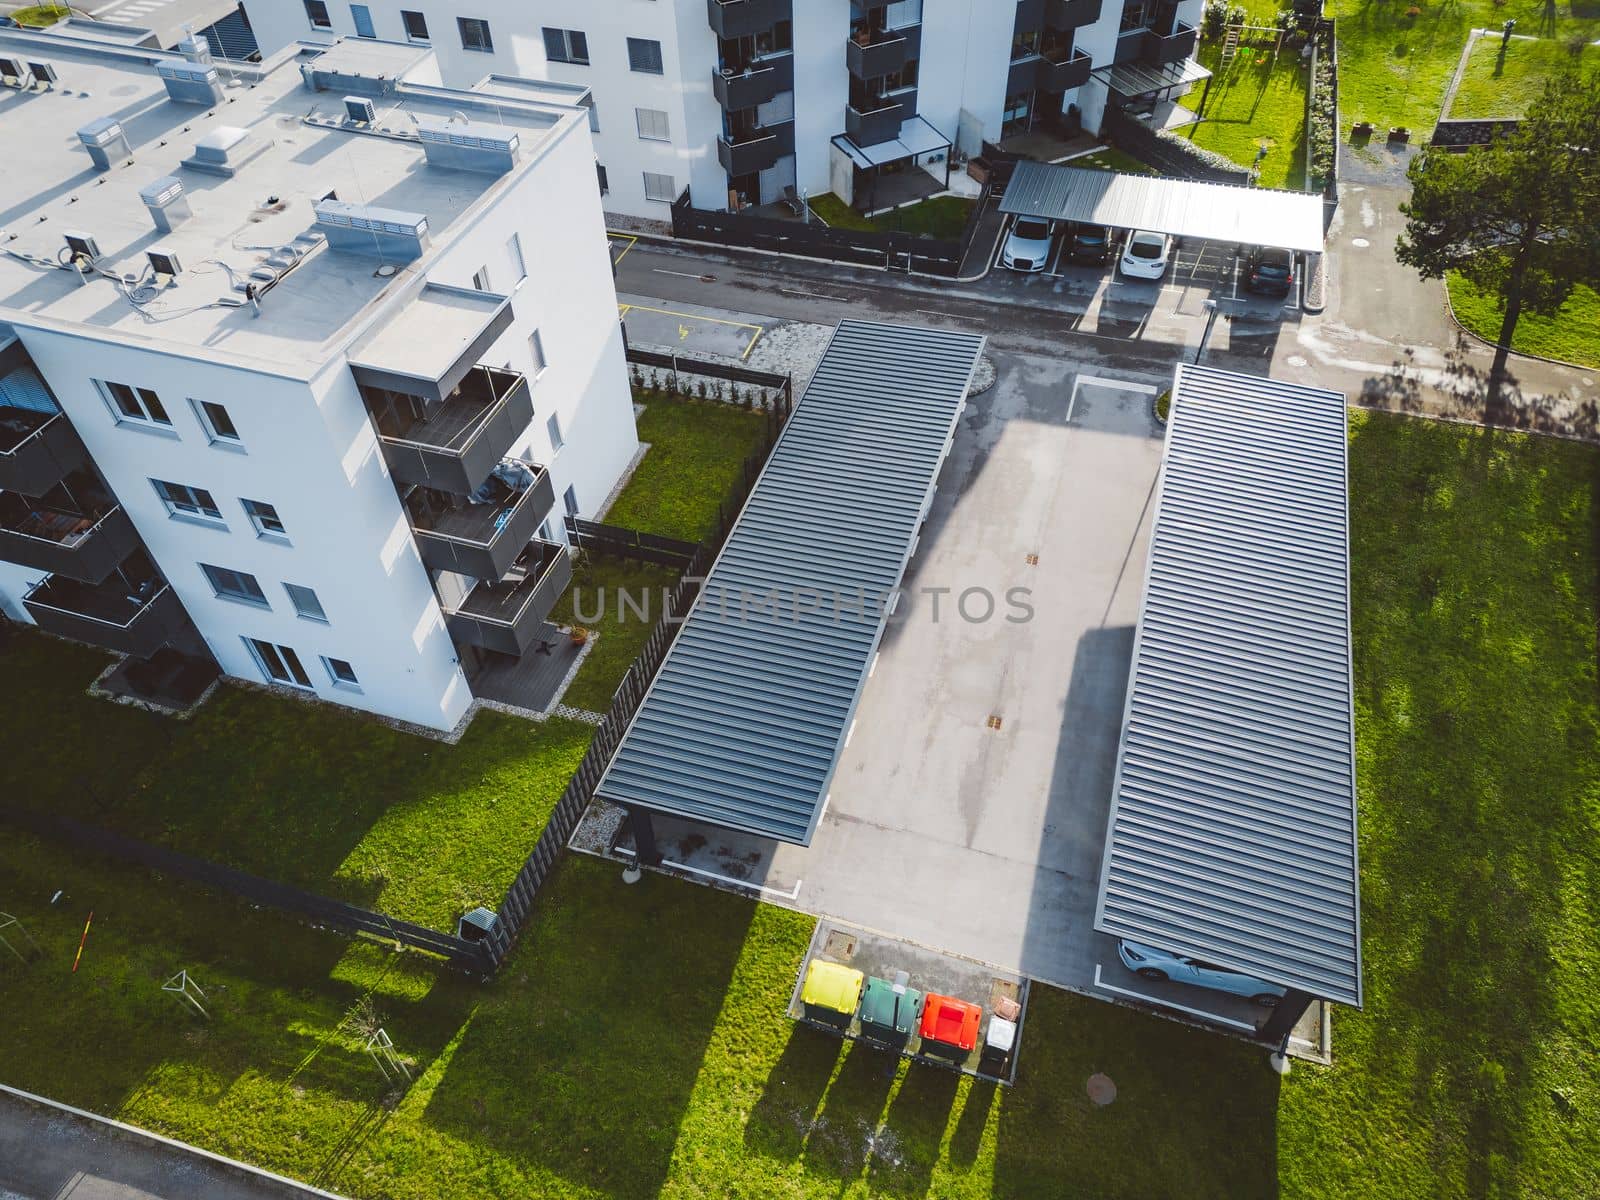 Aerial view of newly build residential buildings with covered parking spaces in front by VisualProductions